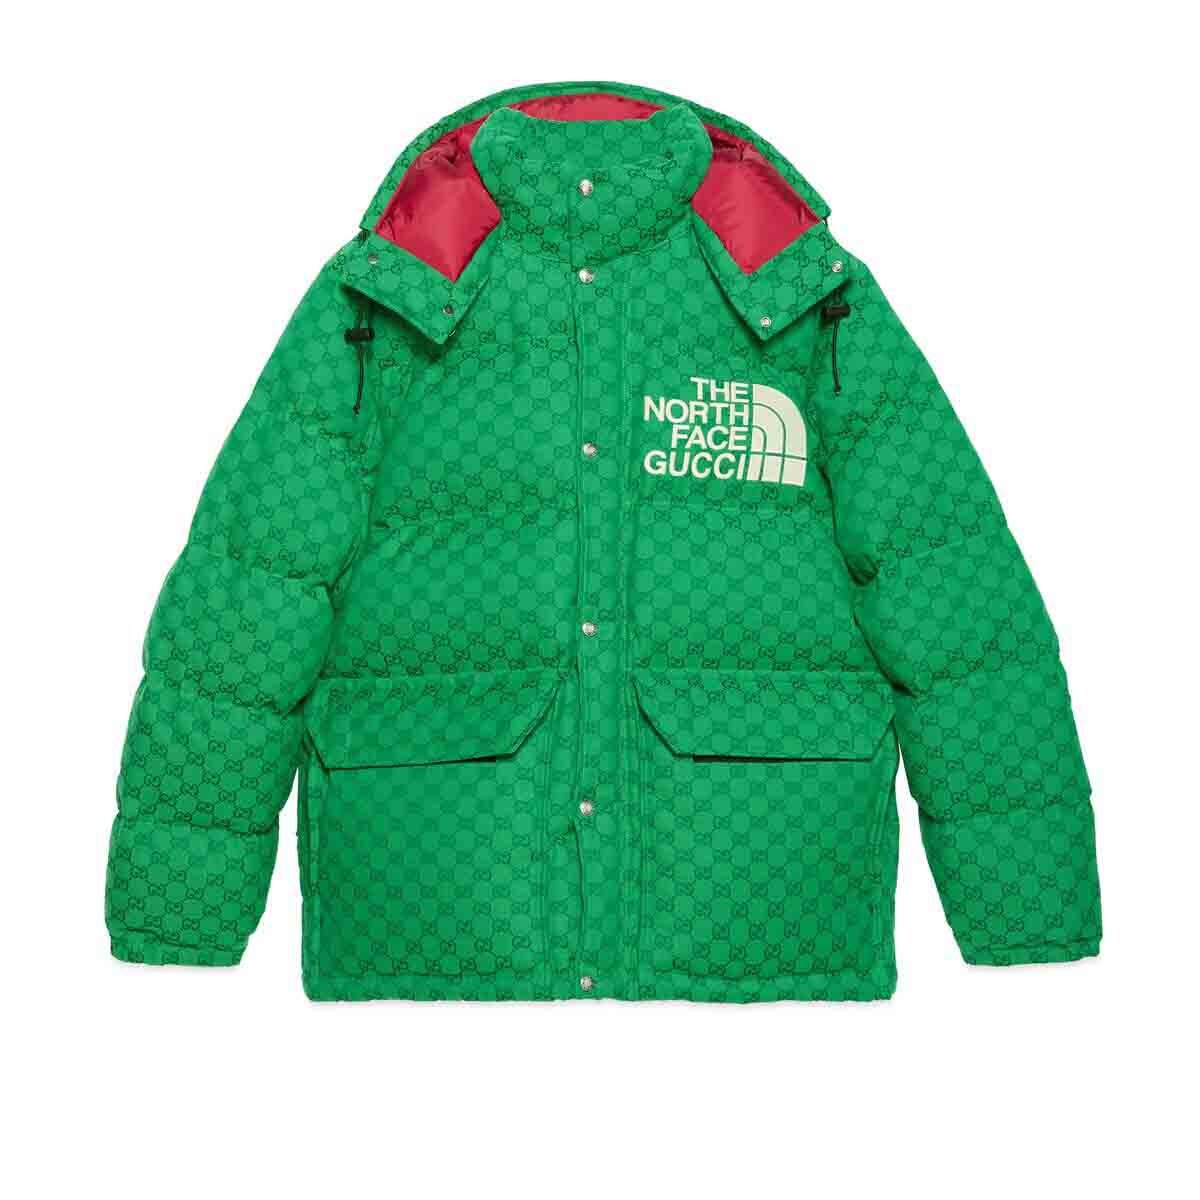 Gucci x The North Face Down Coat Green/Dark Green sneakers